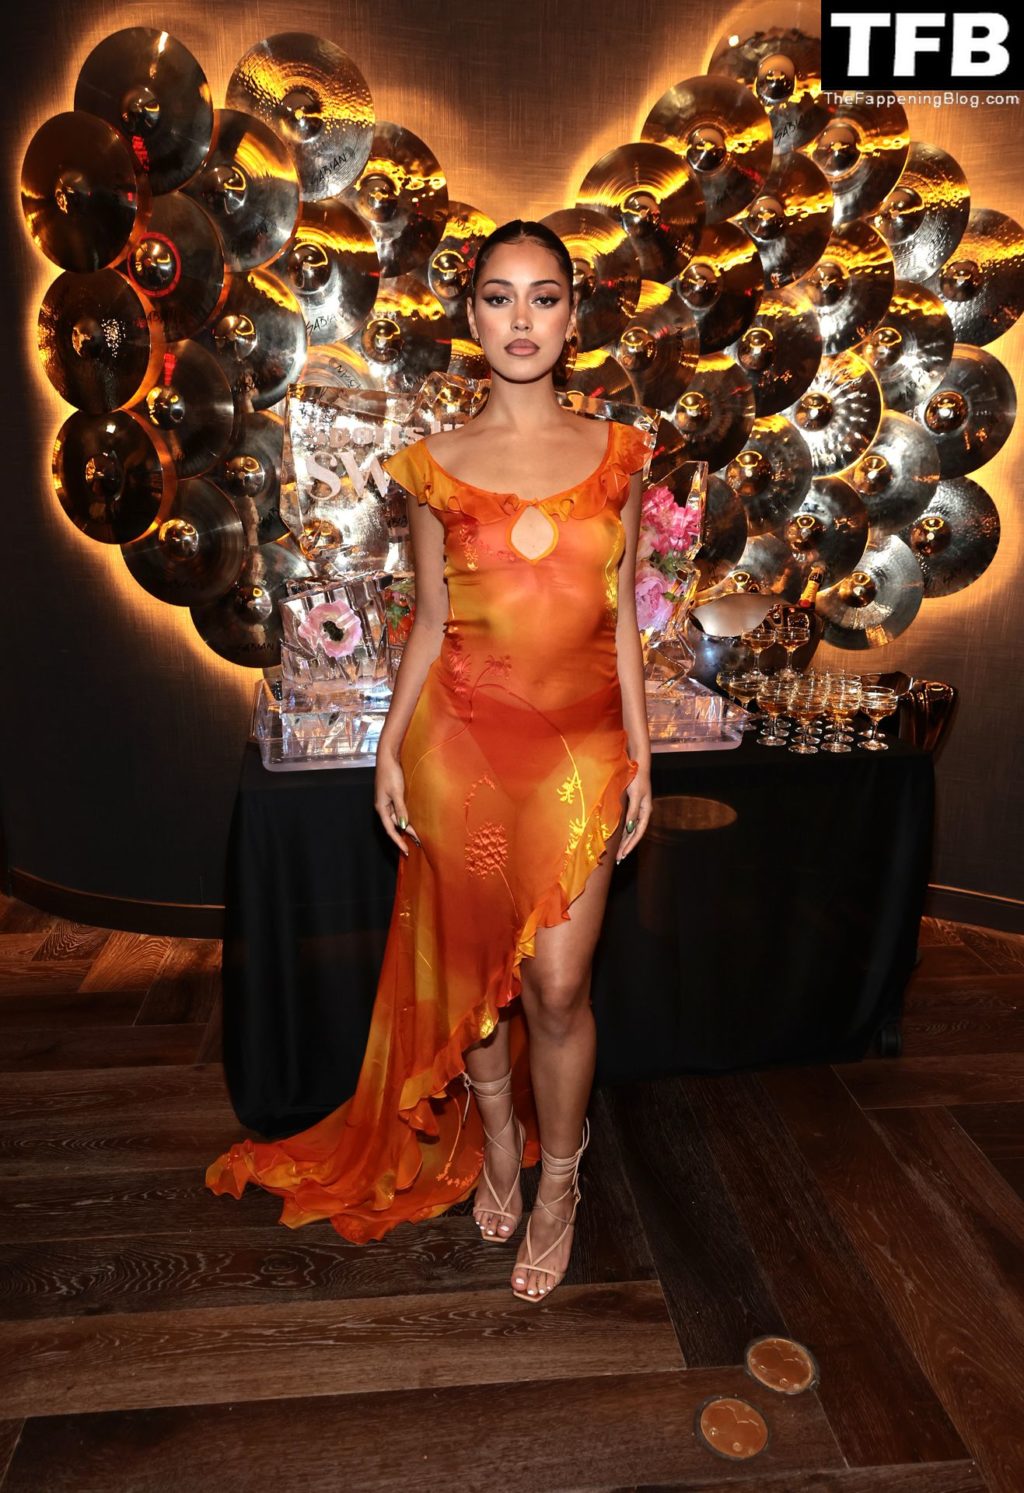 Cindy Kimberly See Through Nudity The Fappening Blog 10 1 1024x1493 - Cindy Kimberly Displays Her Nude Tits in a See-Through Dress at the Sports Illustrated Swimsuit Issue Launch Party (17 Photos)